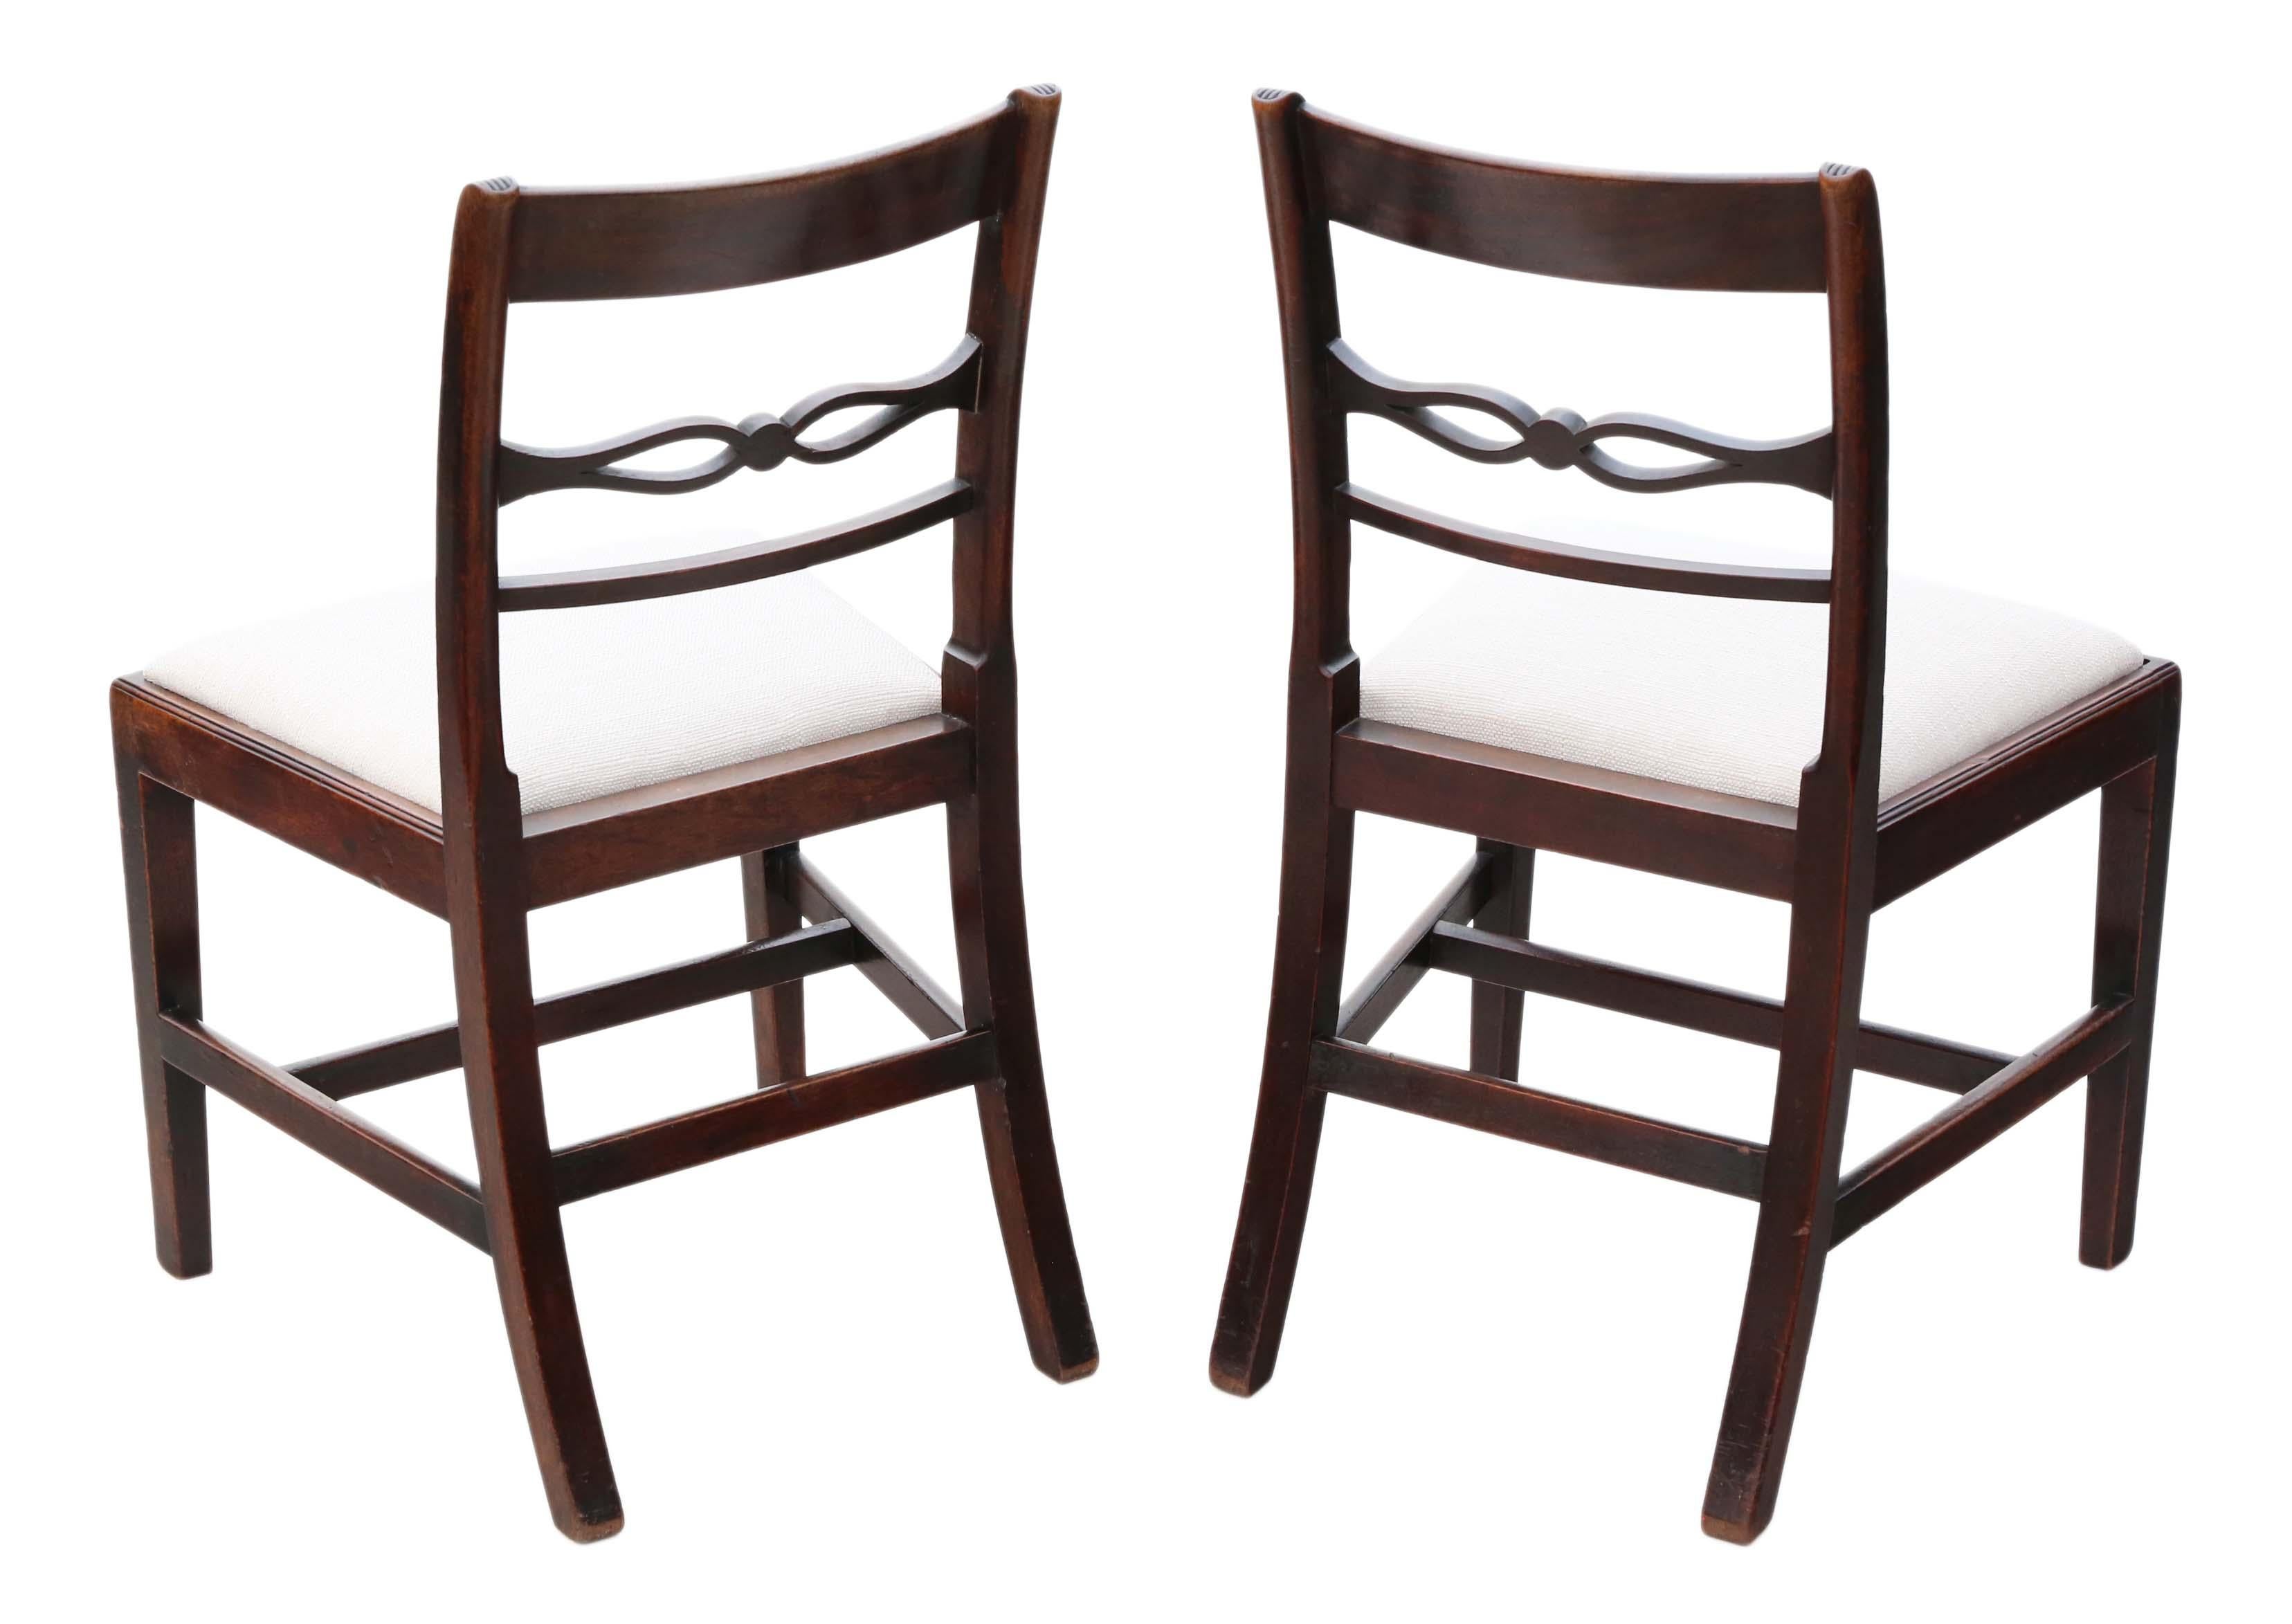 Antique quality pair of Georgian 19th century mahogany dining side hall or bedroom chairs.

Date from circa 1800.

Solid, with no loose joints and no woodworm.

New upholstery in a heavy weight upholstery fabric, with an off-white